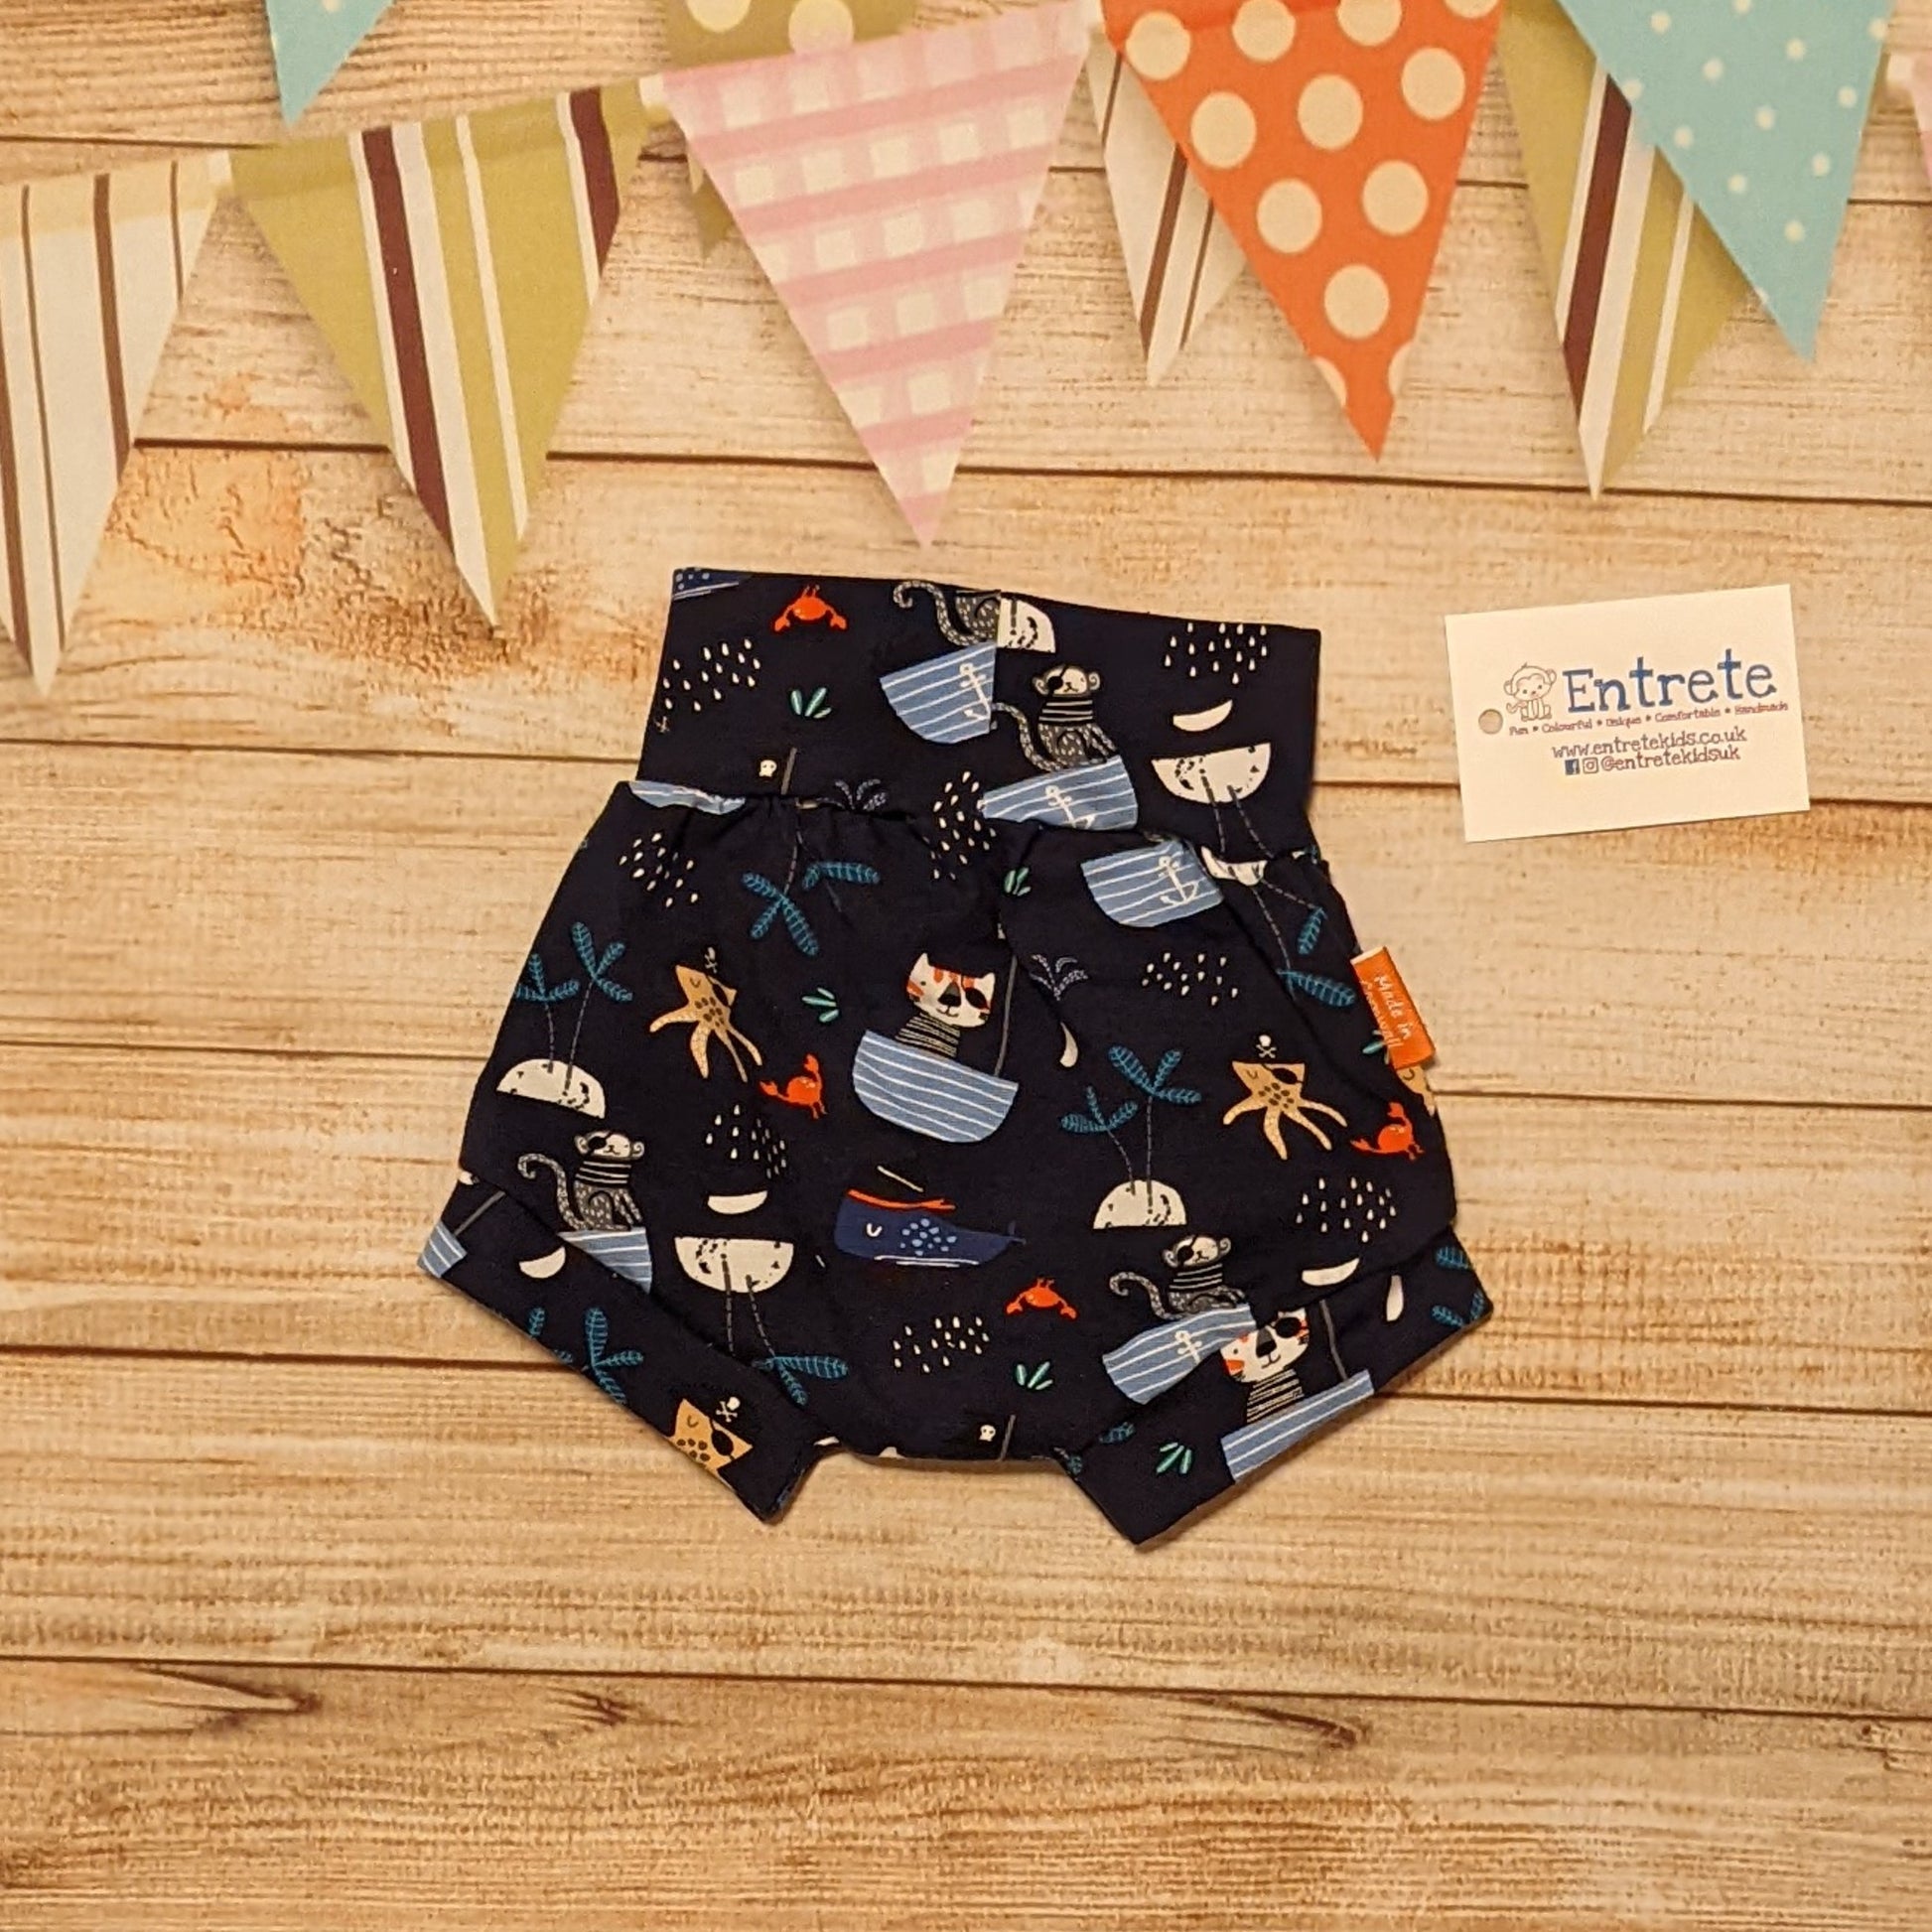 Fun and adventure awaits with these adorable pirate cats shorts. Shown from the rear. Handmade using pirate cats cotton jersey.